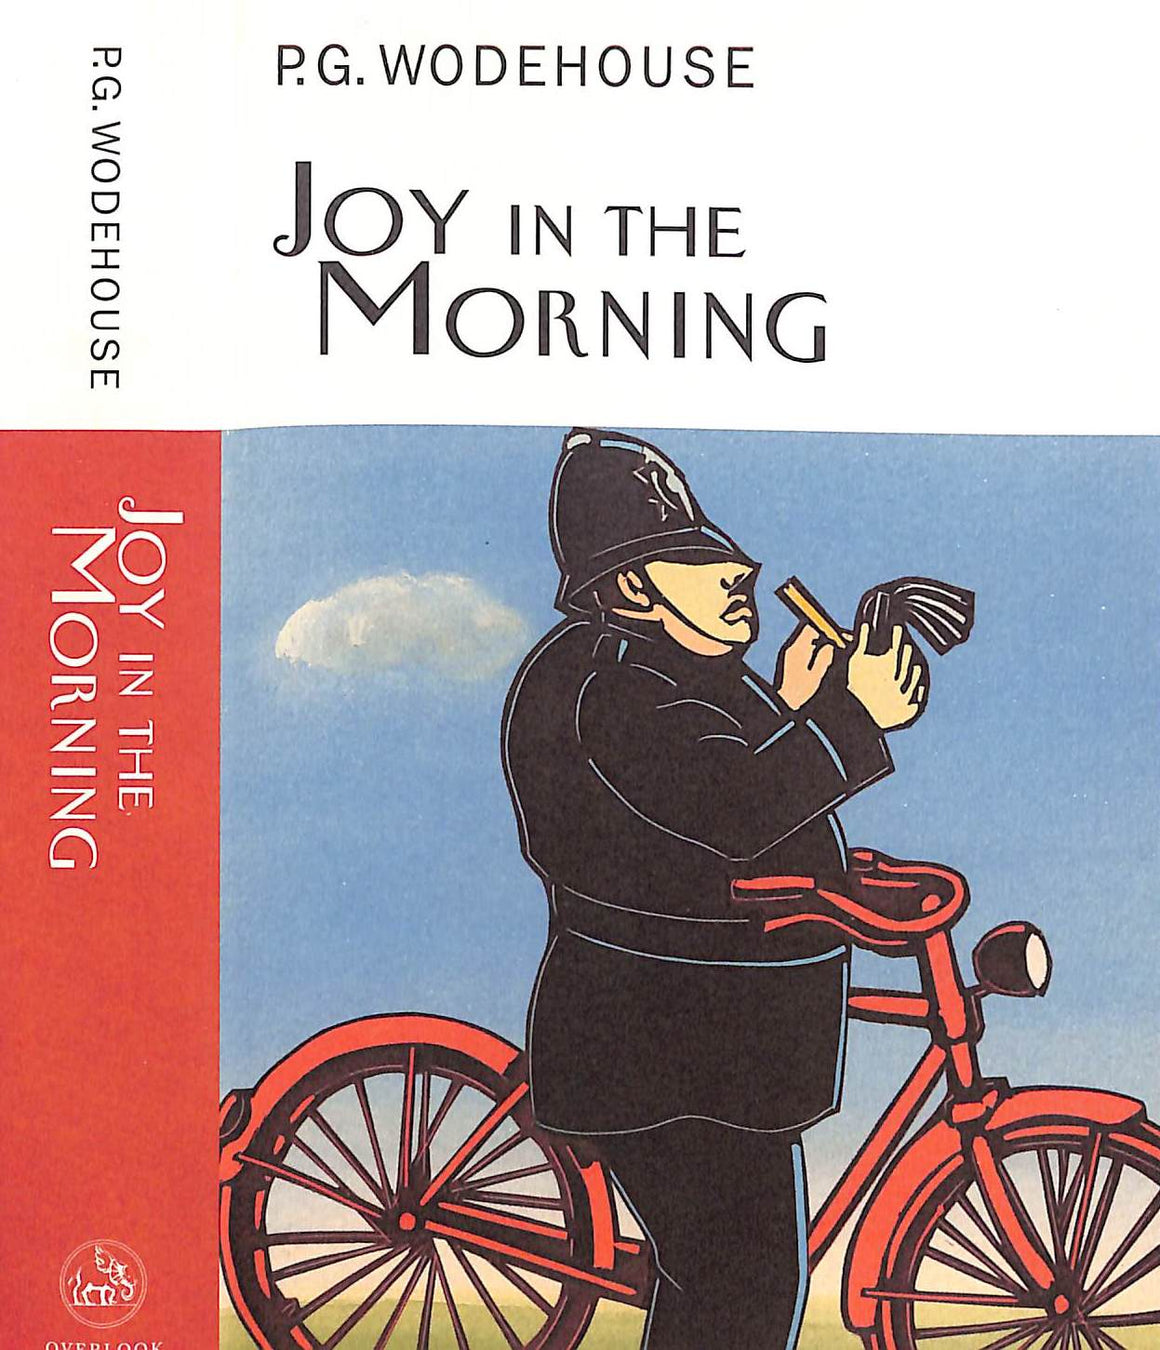 "Joy In The Morning" 2002 WODEHOUSE, P.G. (SOLD)